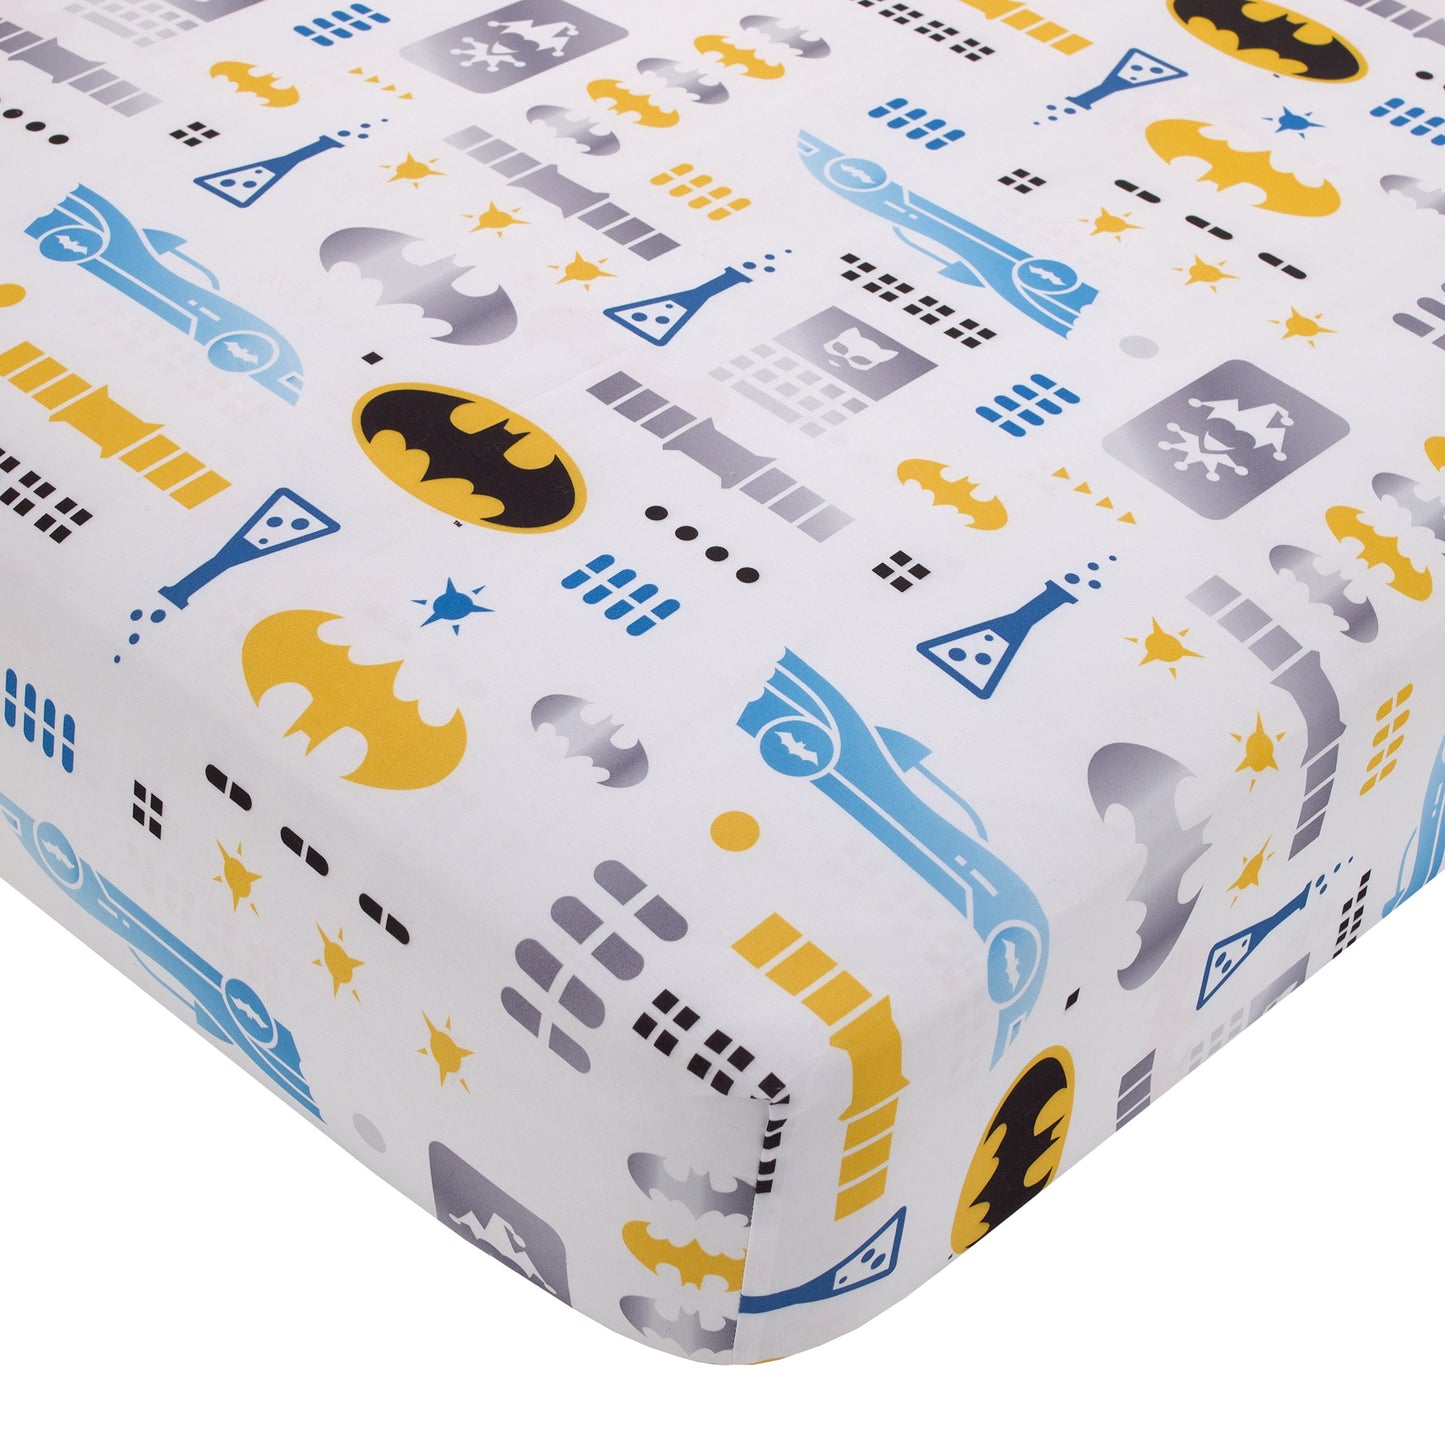 Warner Brothers Batman The Caped Crusader Blue, Gray, and Yellow Bat-Signal and Batmobile 2 Piece Toddler Sheet Set - Fitted Bottom Sheet and Reversible Pillowcase